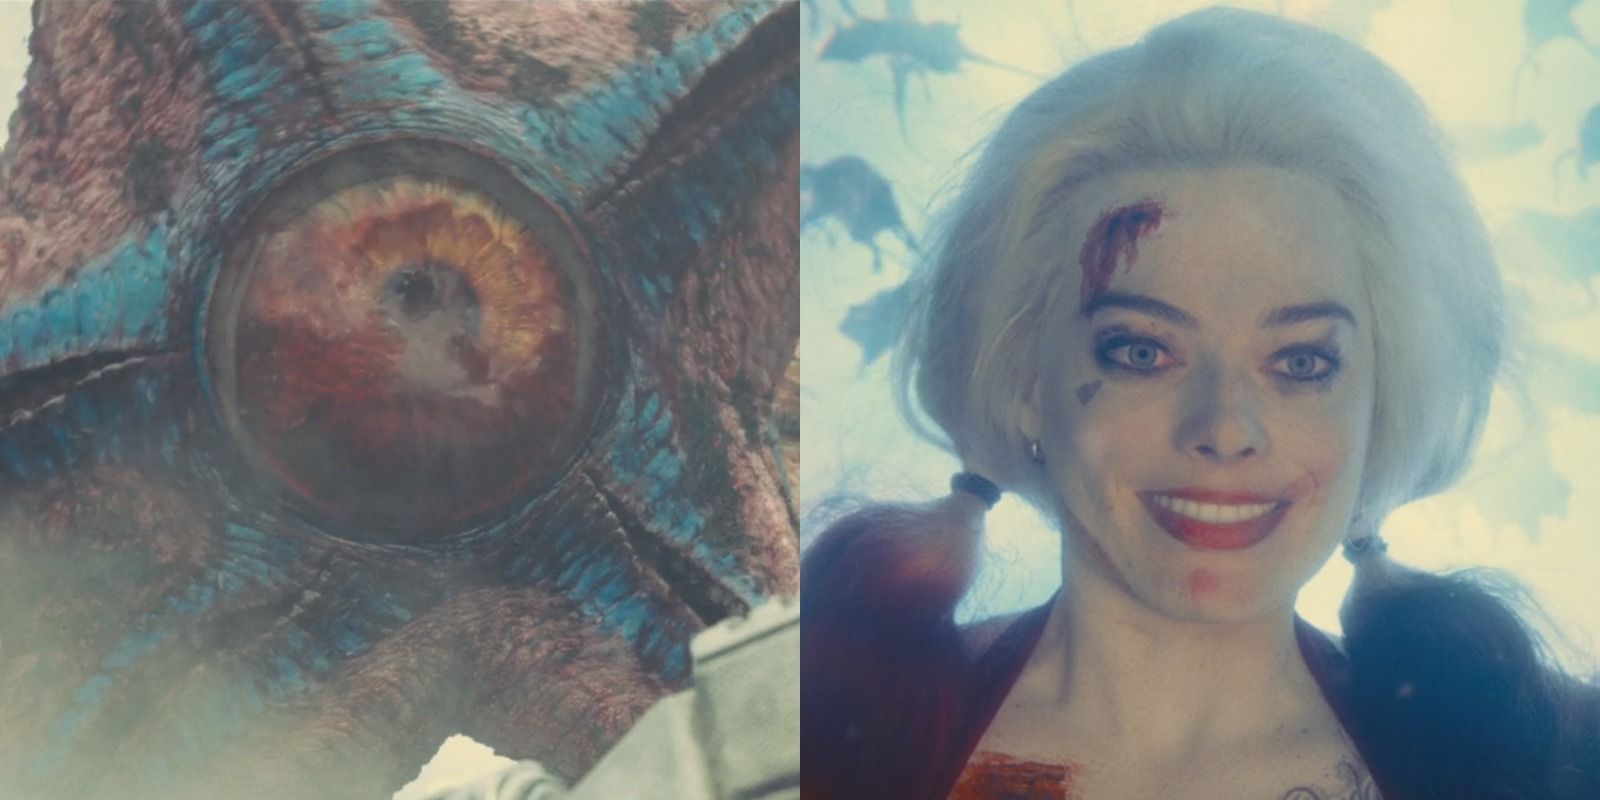 Side-by-side view of Starro succumbing to his wounds on the left and Harley watching the rats kill Starro on the right in James Gunn's The Suicide Squad